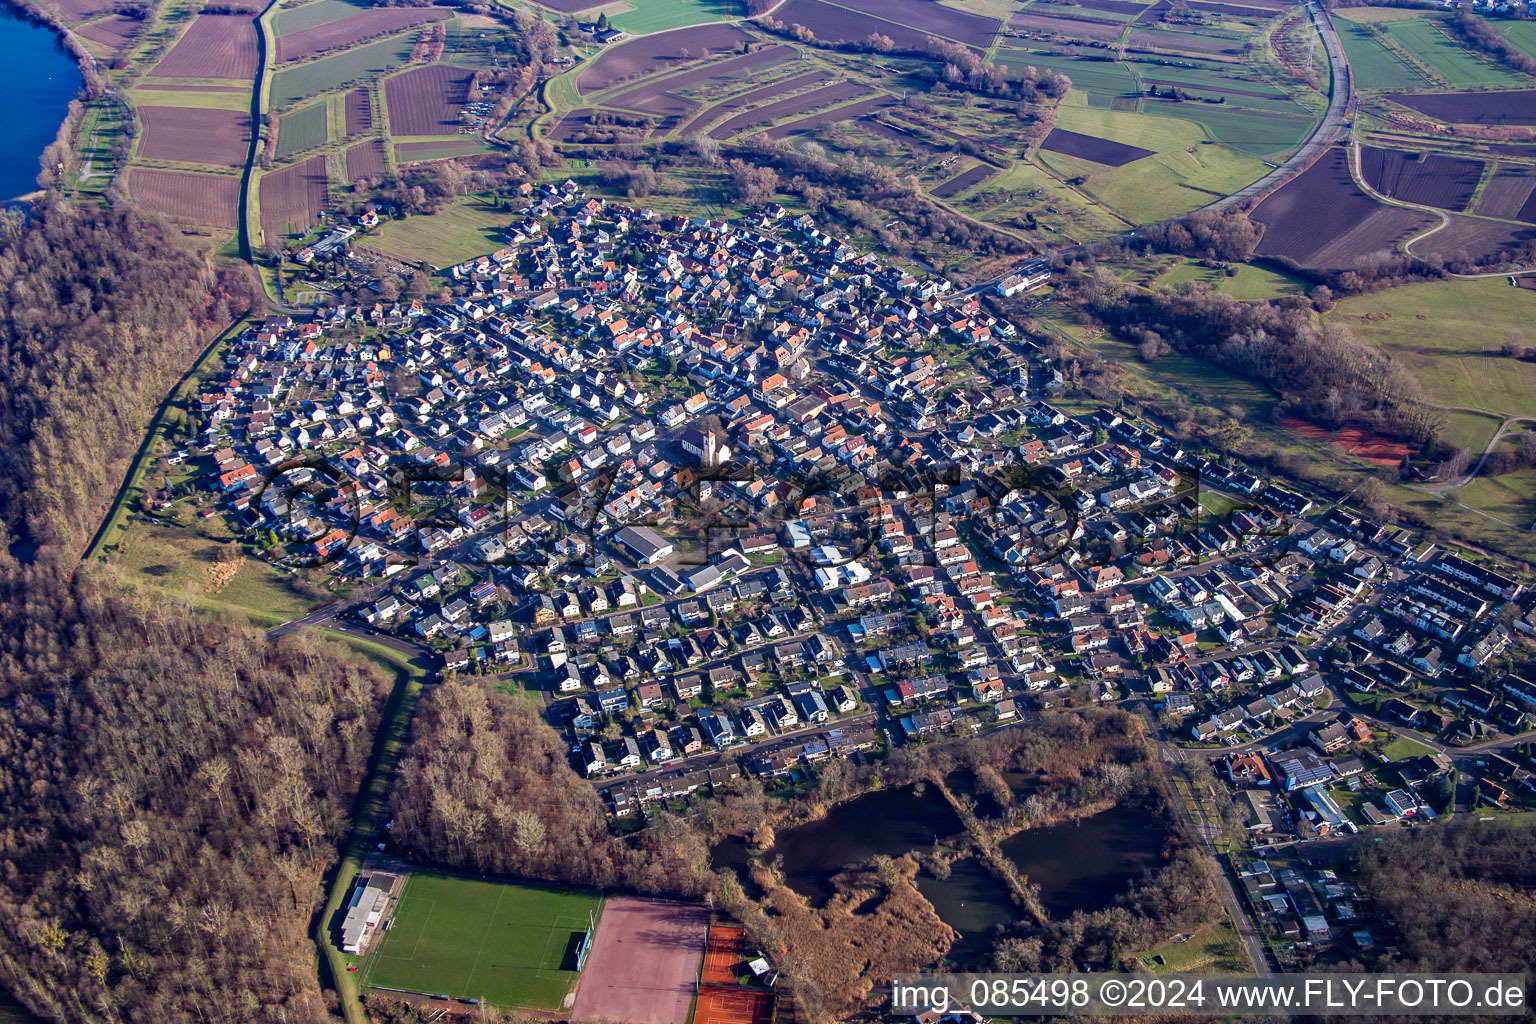 Aerial view of From the north in the district Neuburgweier in Rheinstetten in the state Baden-Wuerttemberg, Germany